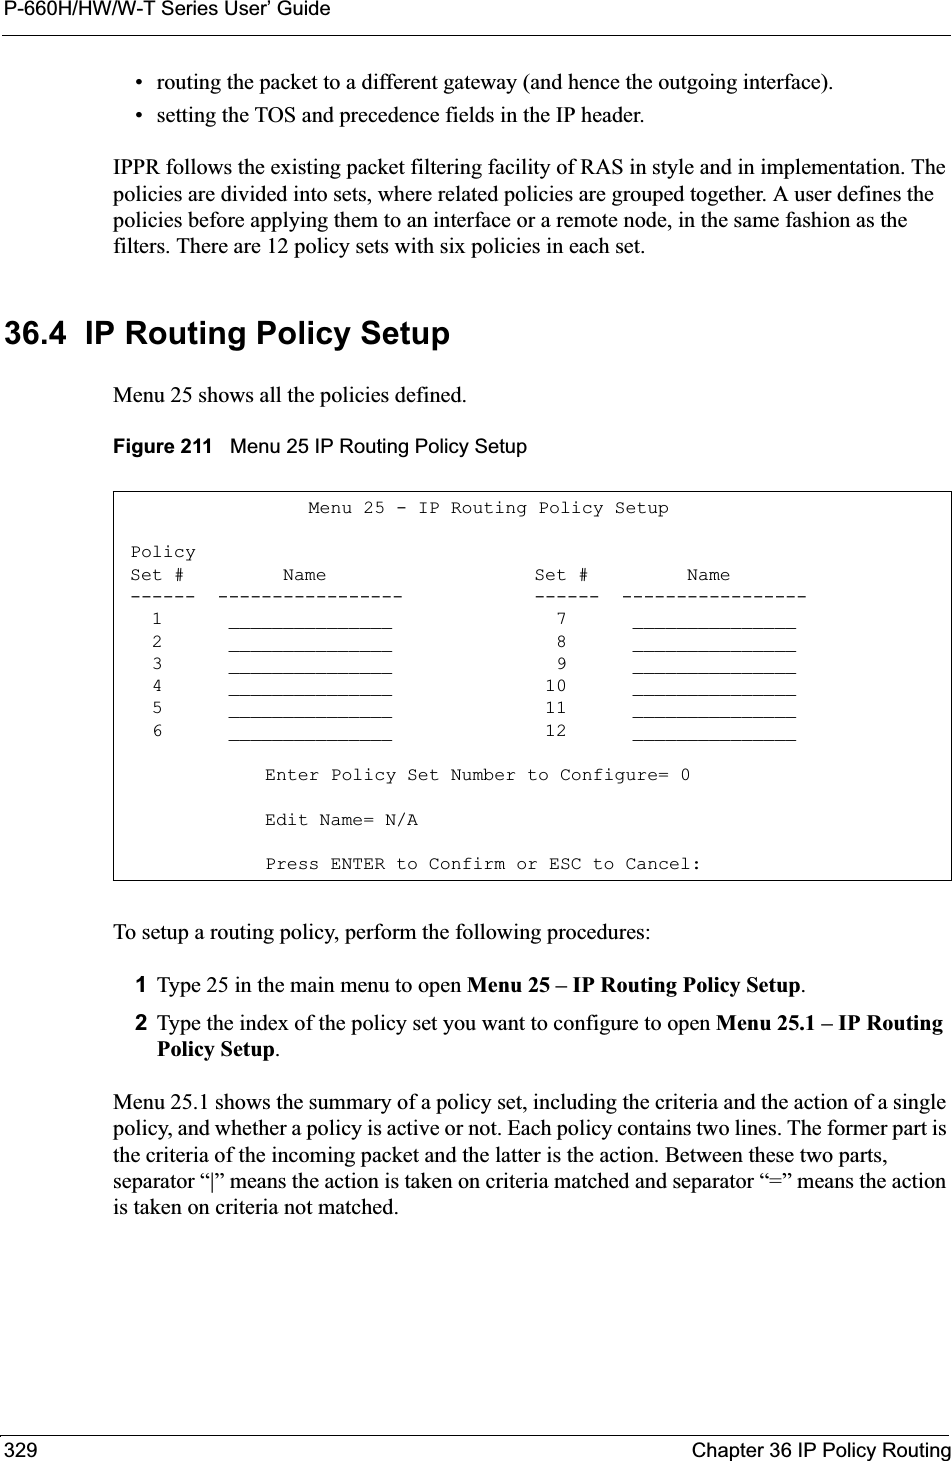 P-660H/HW/W-T Series User’ Guide329 Chapter 36 IP Policy Routing• routing the packet to a different gateway (and hence the outgoing interface).• setting the TOS and precedence fields in the IP header.IPPR follows the existing packet filtering facility of RAS in style and in implementation. The policies are divided into sets, where related policies are grouped together. A user defines the policies before applying them to an interface or a remote node, in the same fashion as the filters. There are 12 policy sets with six policies in each set.36.4  IP Routing Policy SetupMenu 25 shows all the policies defined.Figure 211   Menu 25 IP Routing Policy SetupTo setup a routing policy, perform the following procedures:1Type 25 in the main menu to open Menu 25 – IP Routing Policy Setup.2Type the index of the policy set you want to configure to open Menu 25.1 – IP Routing Policy Setup.Menu 25.1 shows the summary of a policy set, including the criteria and the action of a single policy, and whether a policy is active or not. Each policy contains two lines. The former part is the criteria of the incoming packet and the latter is the action. Between these two parts, separator “|” means the action is taken on criteria matched and separator “=” means the action is taken on criteria not matched.    Menu 25 - IP Routing Policy Setup Policy Set #         Name                   Set #         Name ------  -----------------            ------  -----------------   1      _______________               7      _______________   2      _______________               8      _______________   3      _______________               9      _______________   4      _______________              10      _______________   5      _______________              11      _______________   6      _______________              12      _______________Enter Policy Set Number to Configure= 0Edit Name= N/APress ENTER to Confirm or ESC to Cancel: